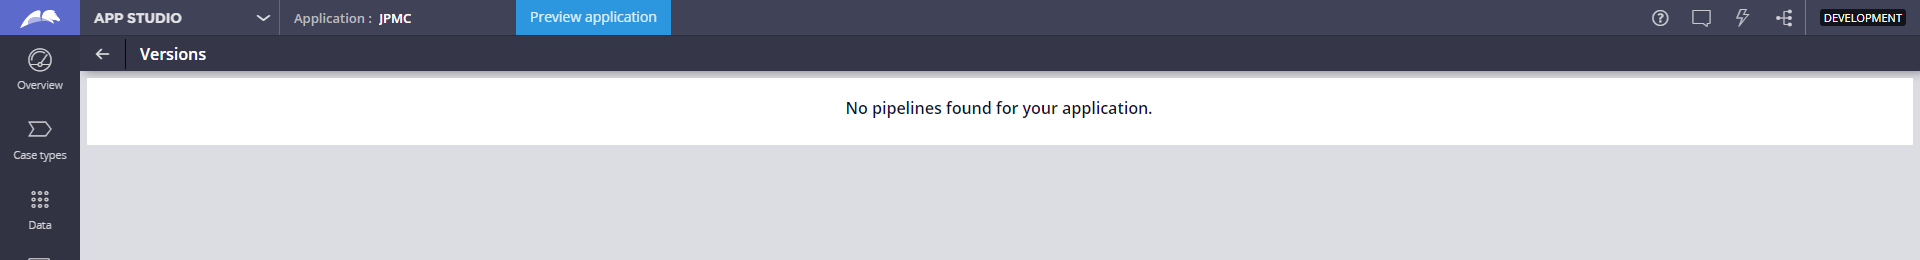 App Studio returns an error if you attempt to publish with no
                            deployment pipelines configured.